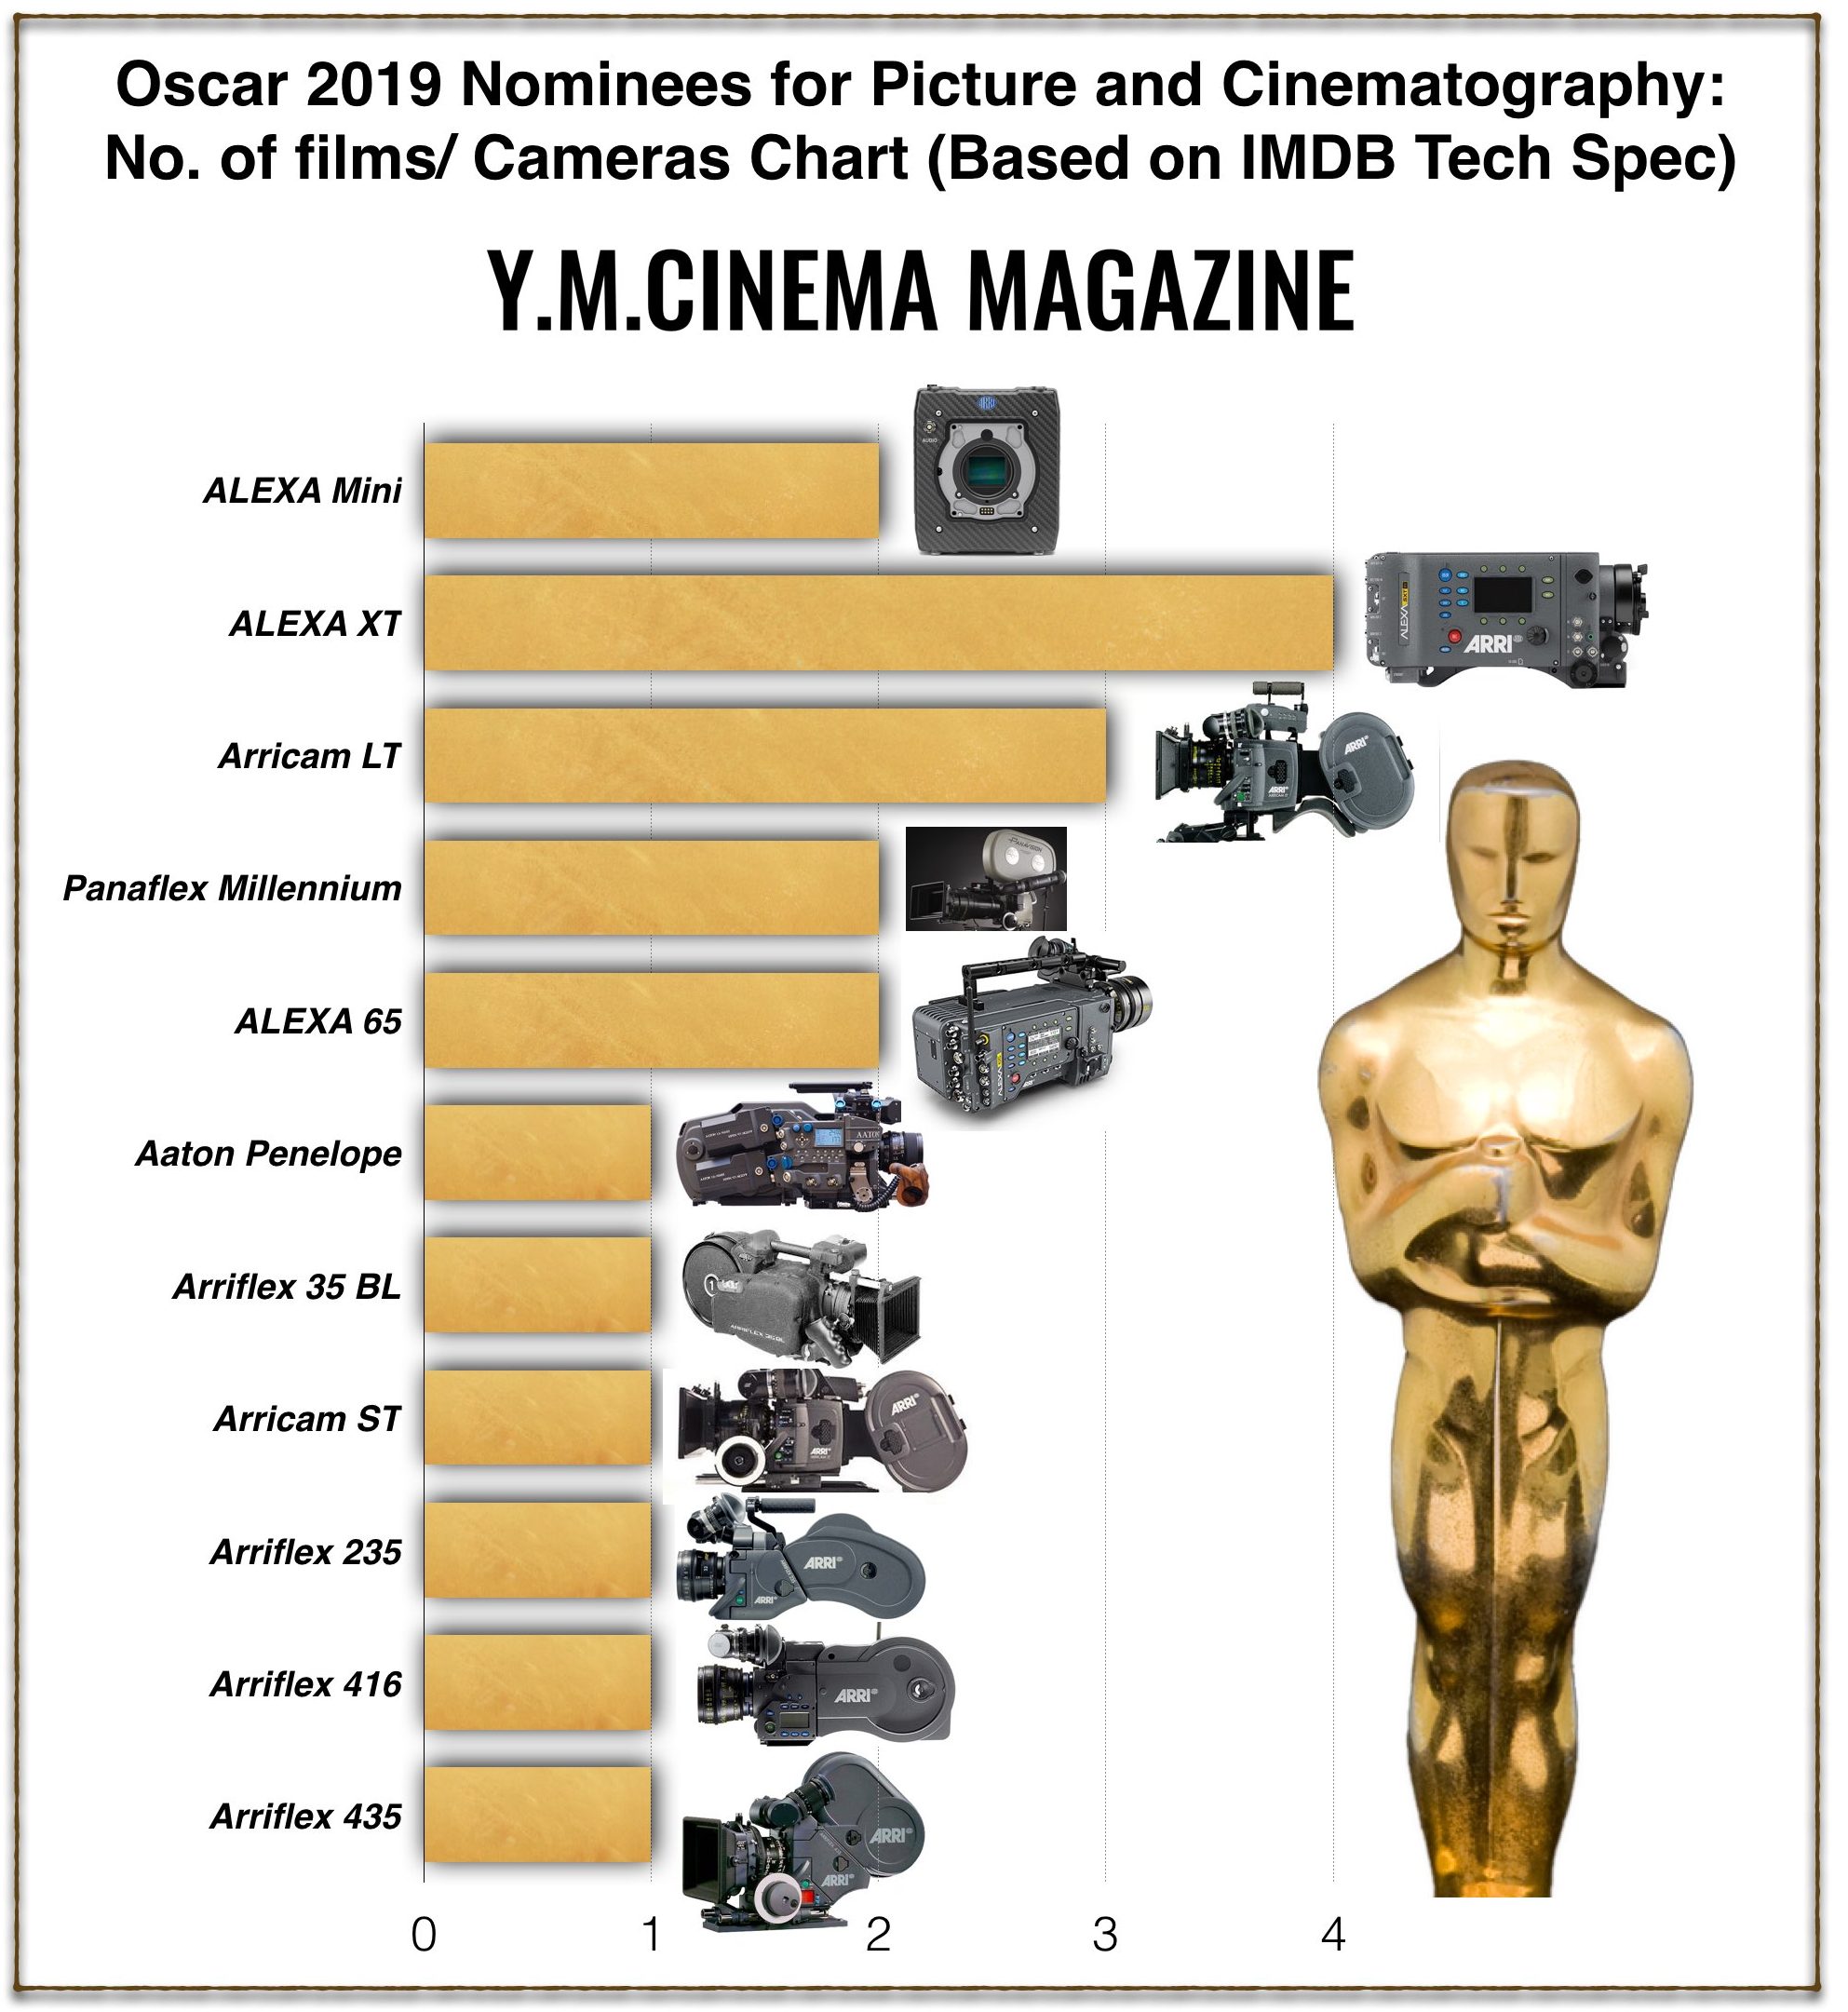 The Oscar 2019 Nominees for Picture and Cinematography: No. of films/ Cameras Chart